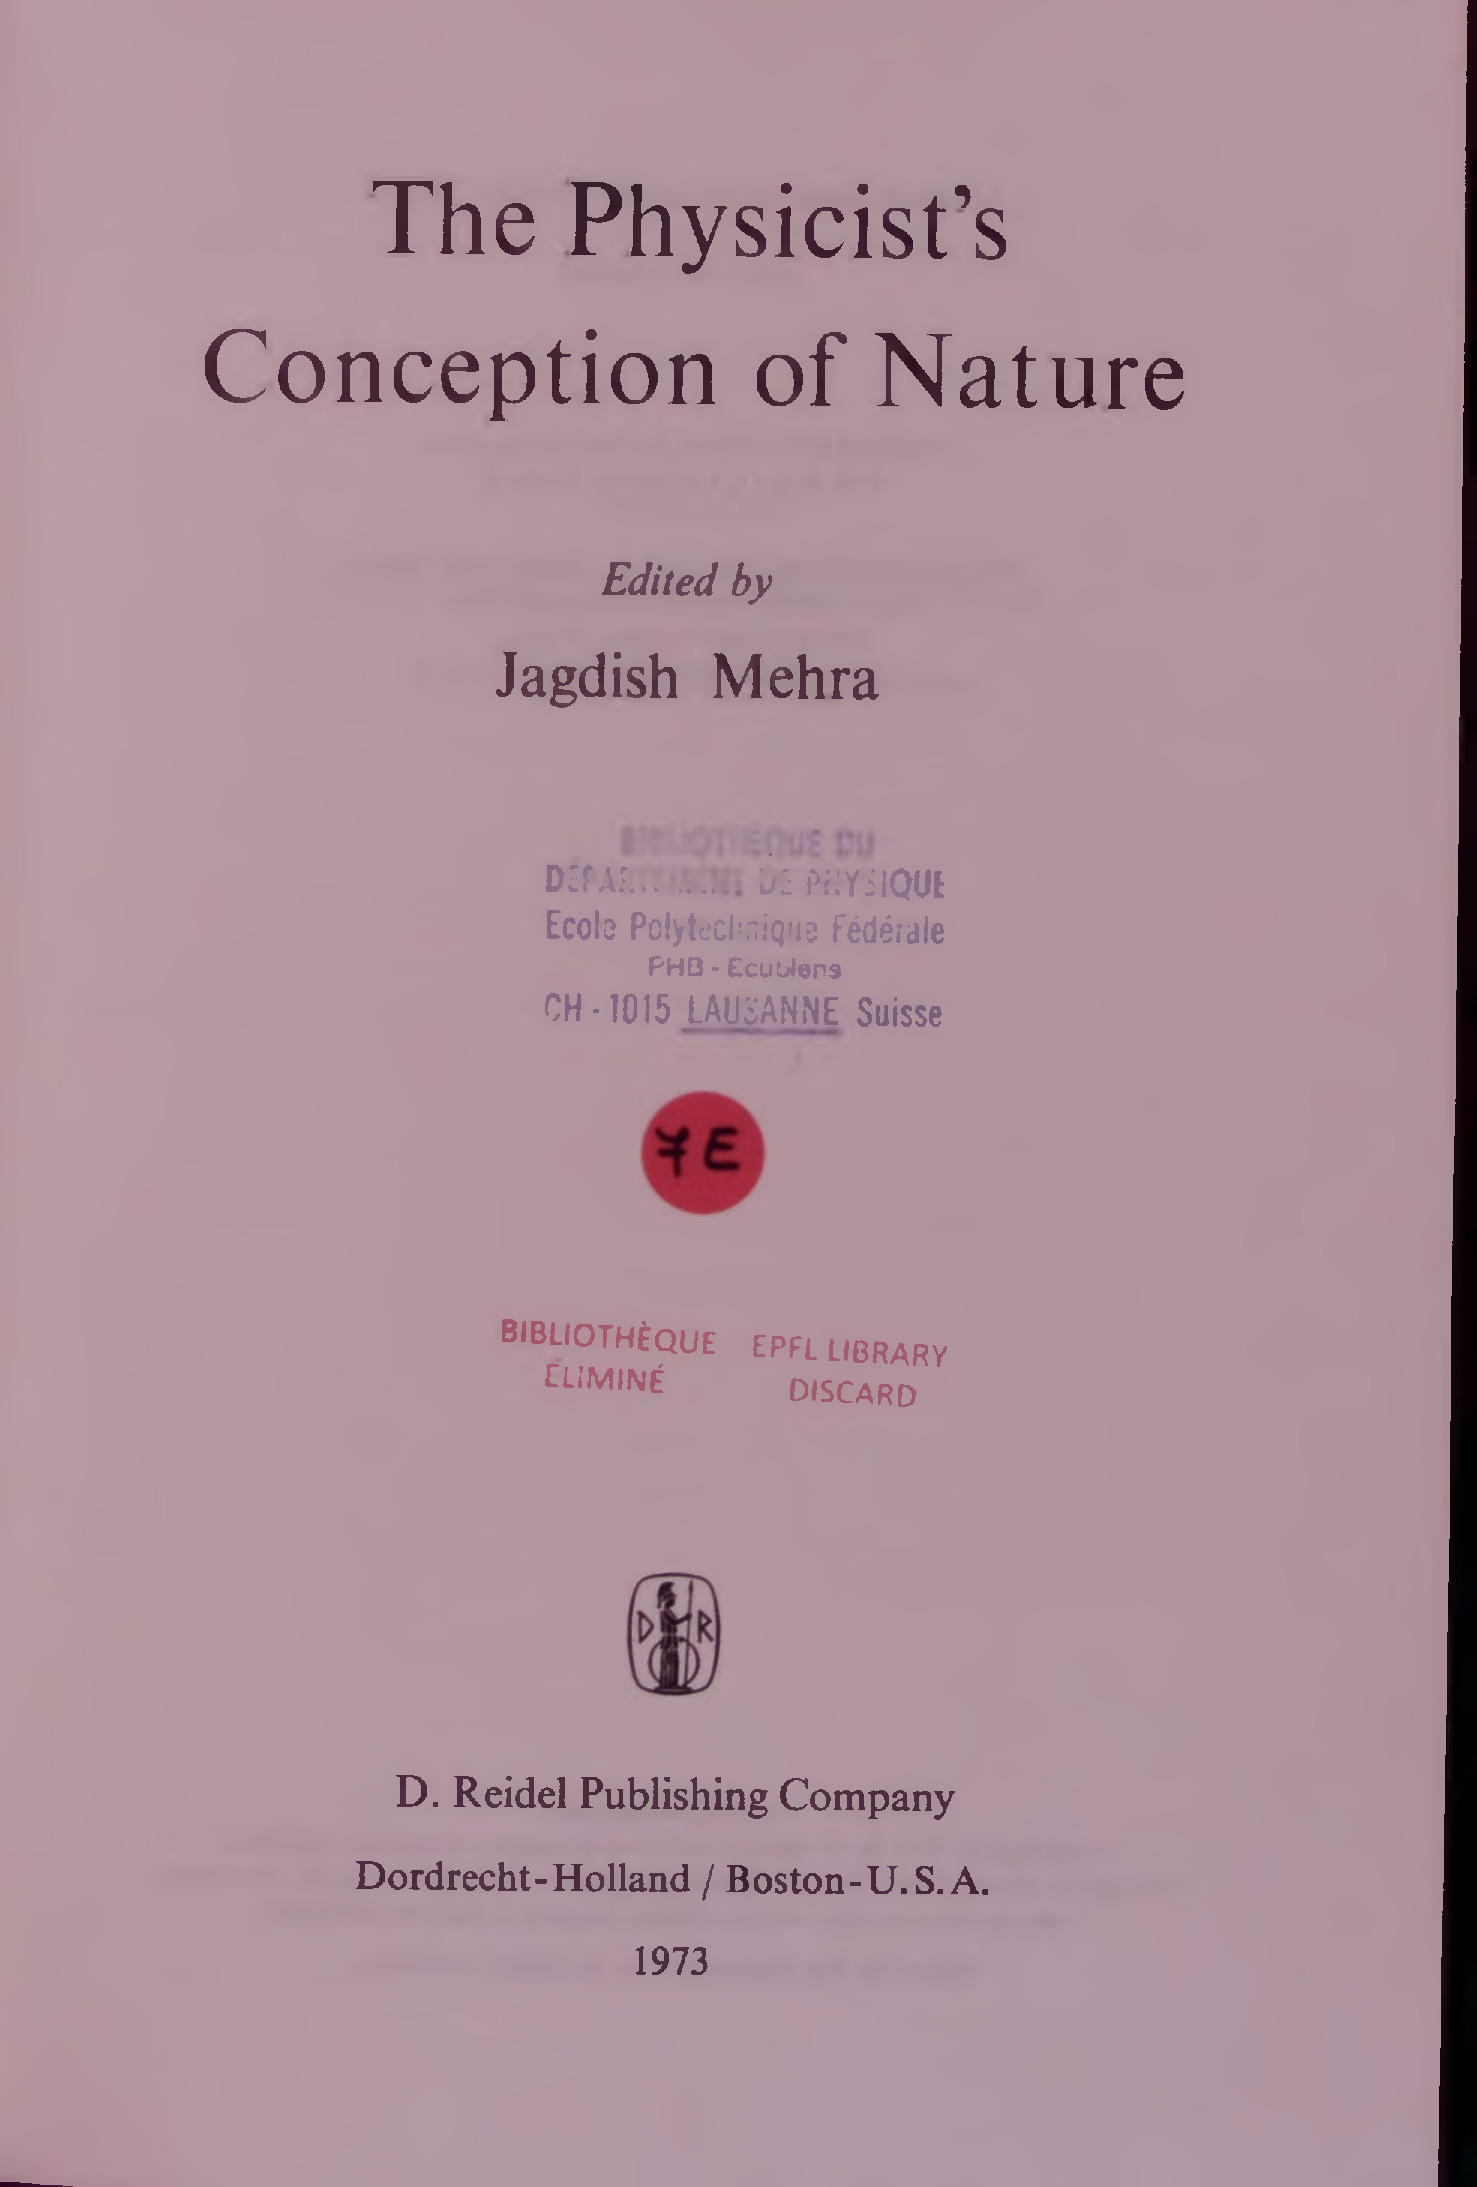 The Physicist’s Conception of Nature. - Mehra, Jagdish